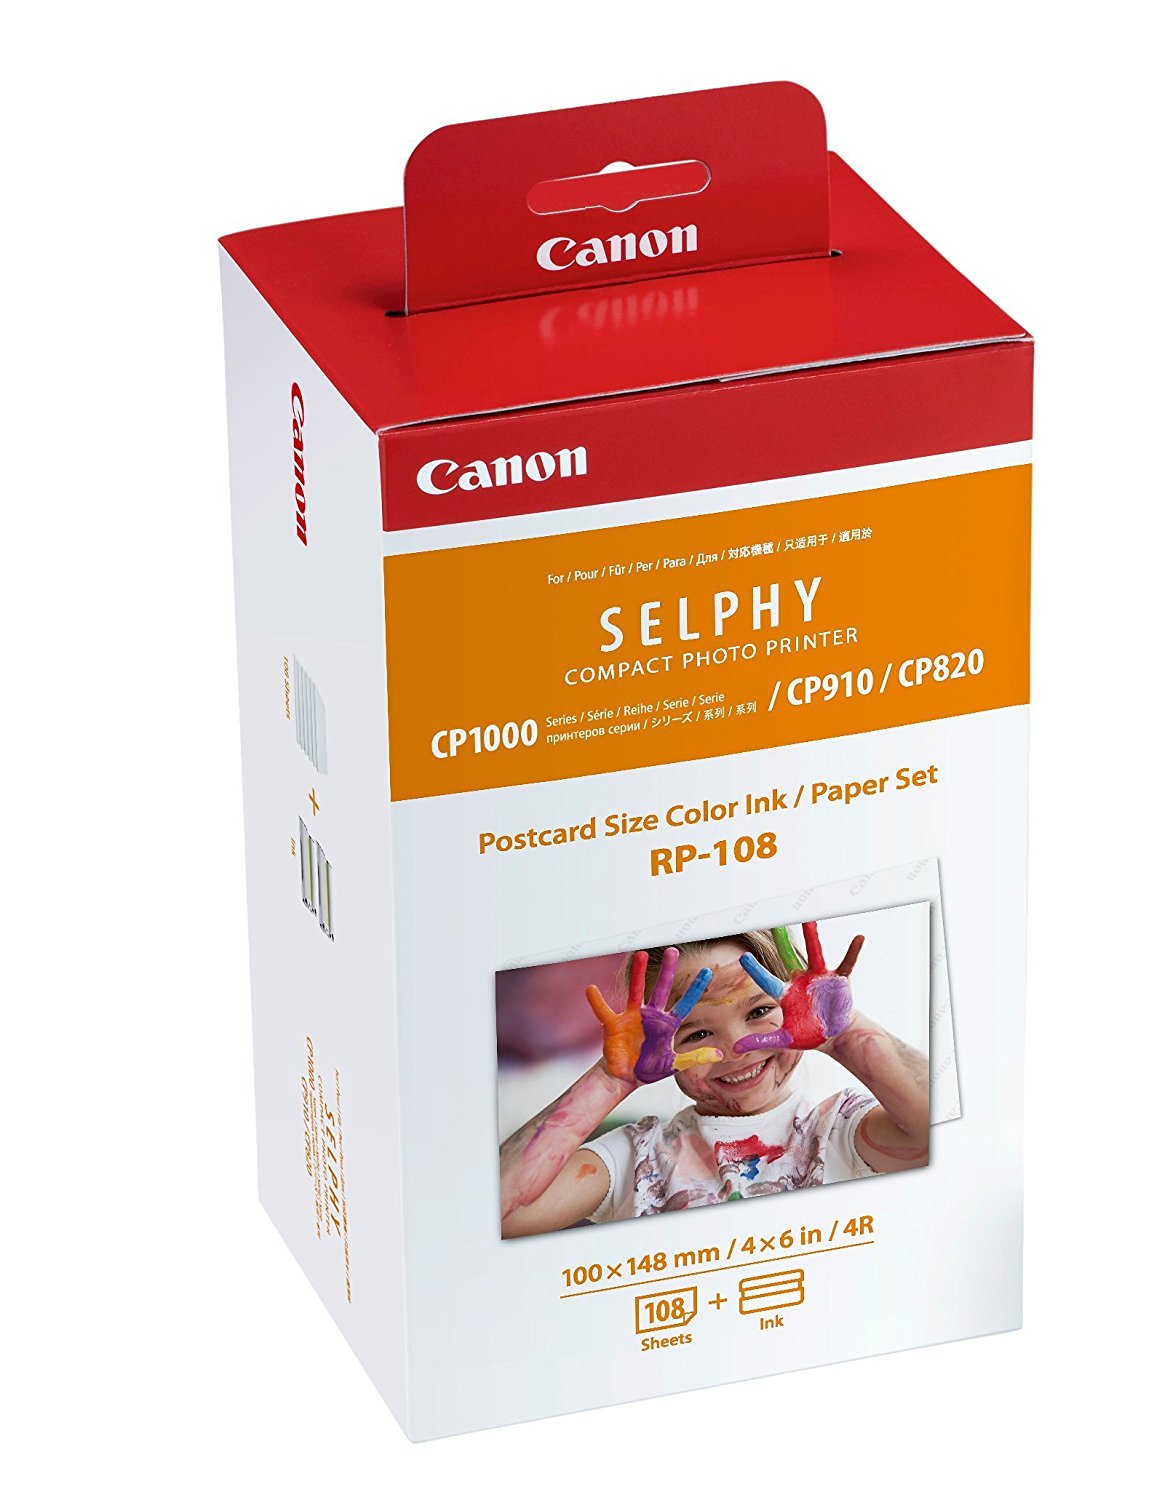 Canon RP-108 4x6 108 Sheets Paper and Ink Set